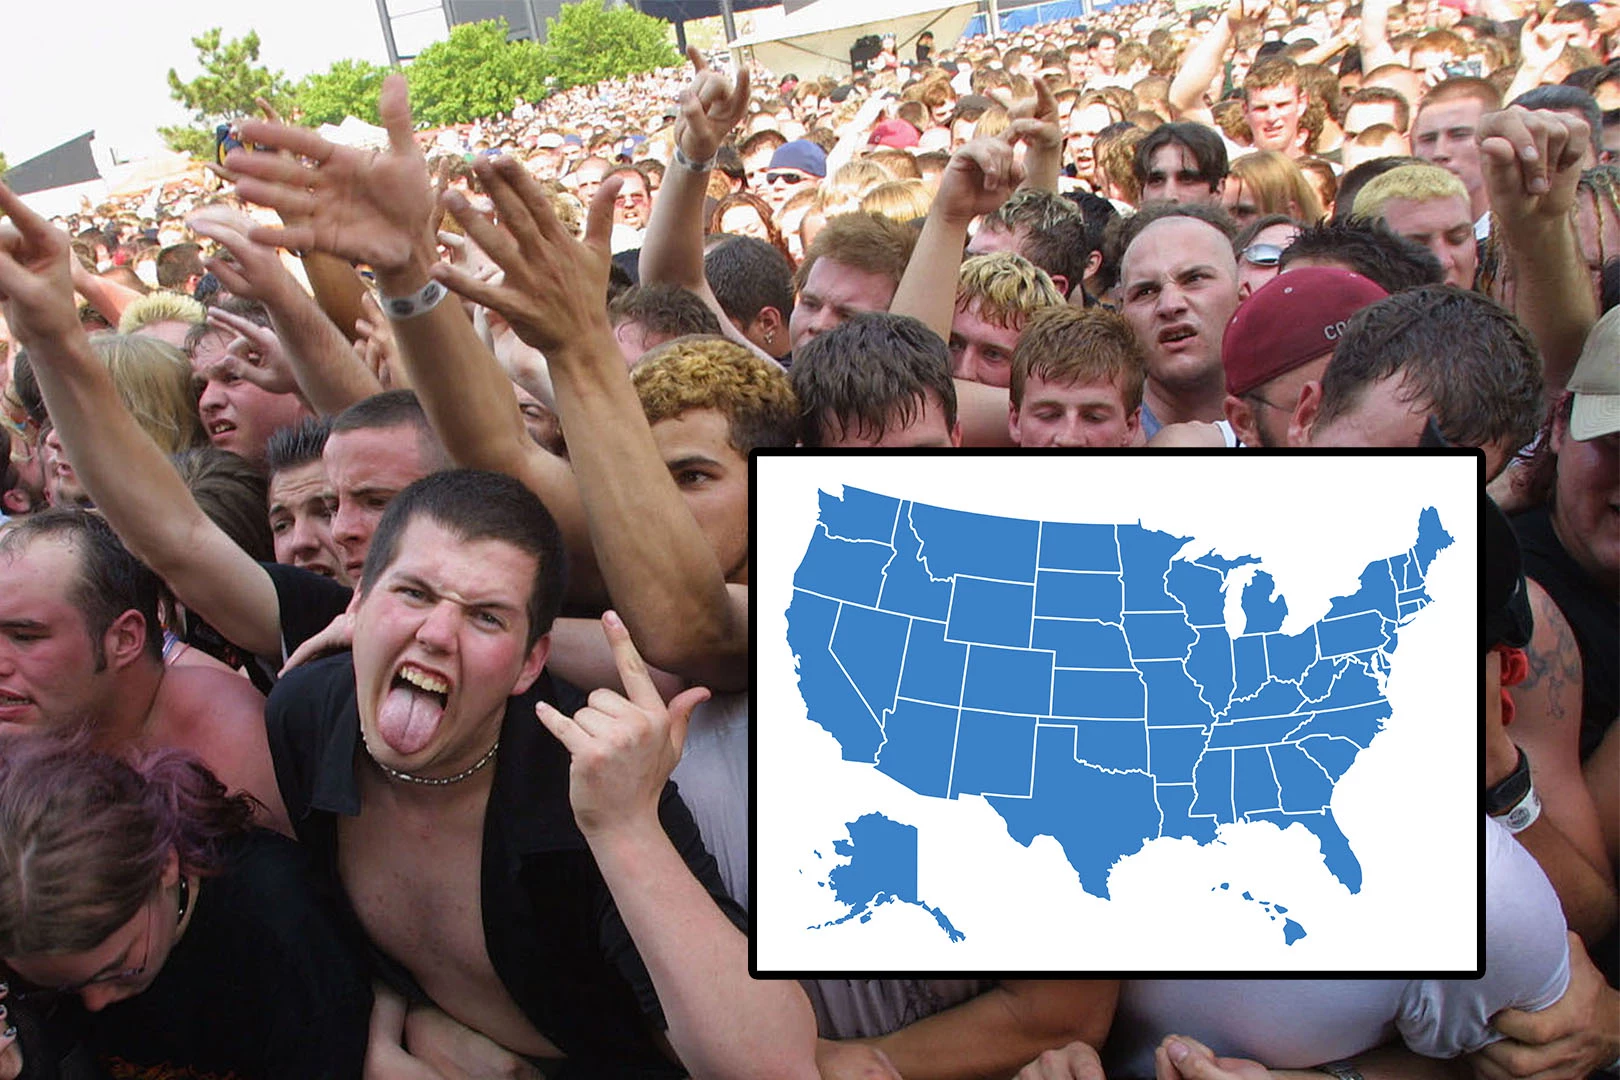 Study Shows Which U.S. States Have the ‘Rowdiest’ Concert Crowds